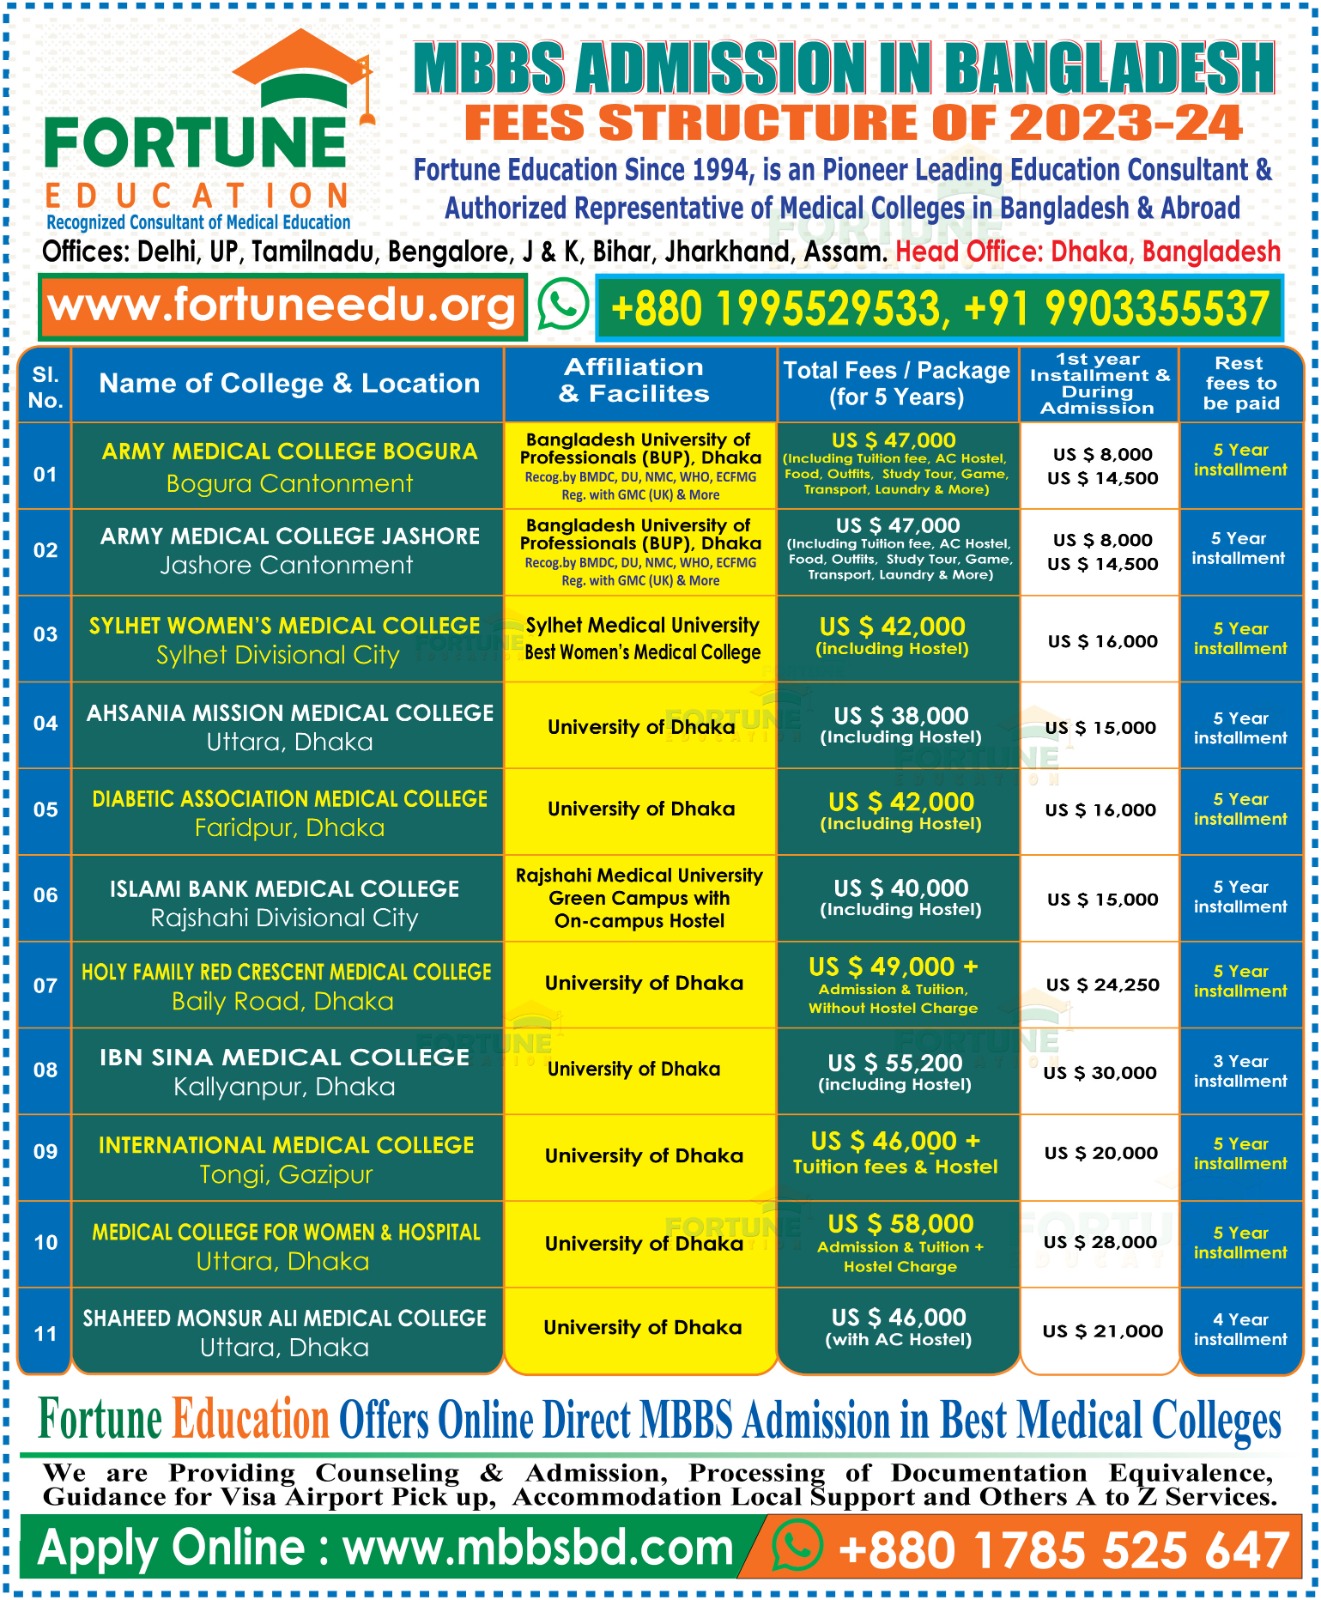 Role of Fortune Education